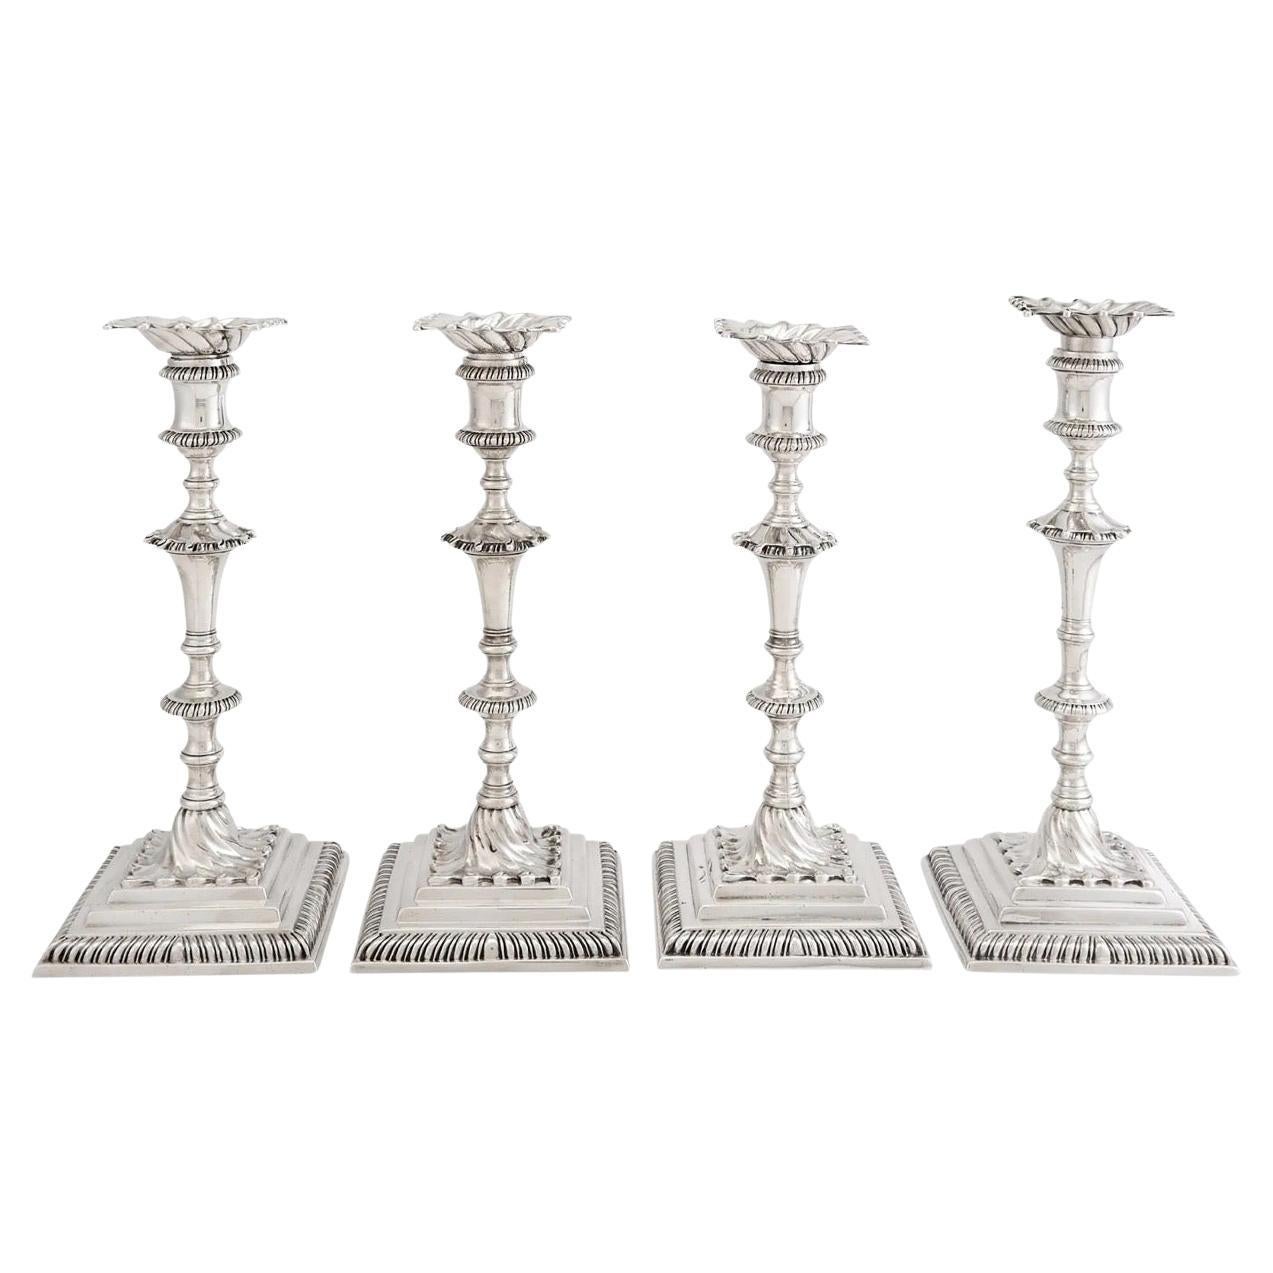 1764, Set of Four George III Sterling Silver Candlesticks, English